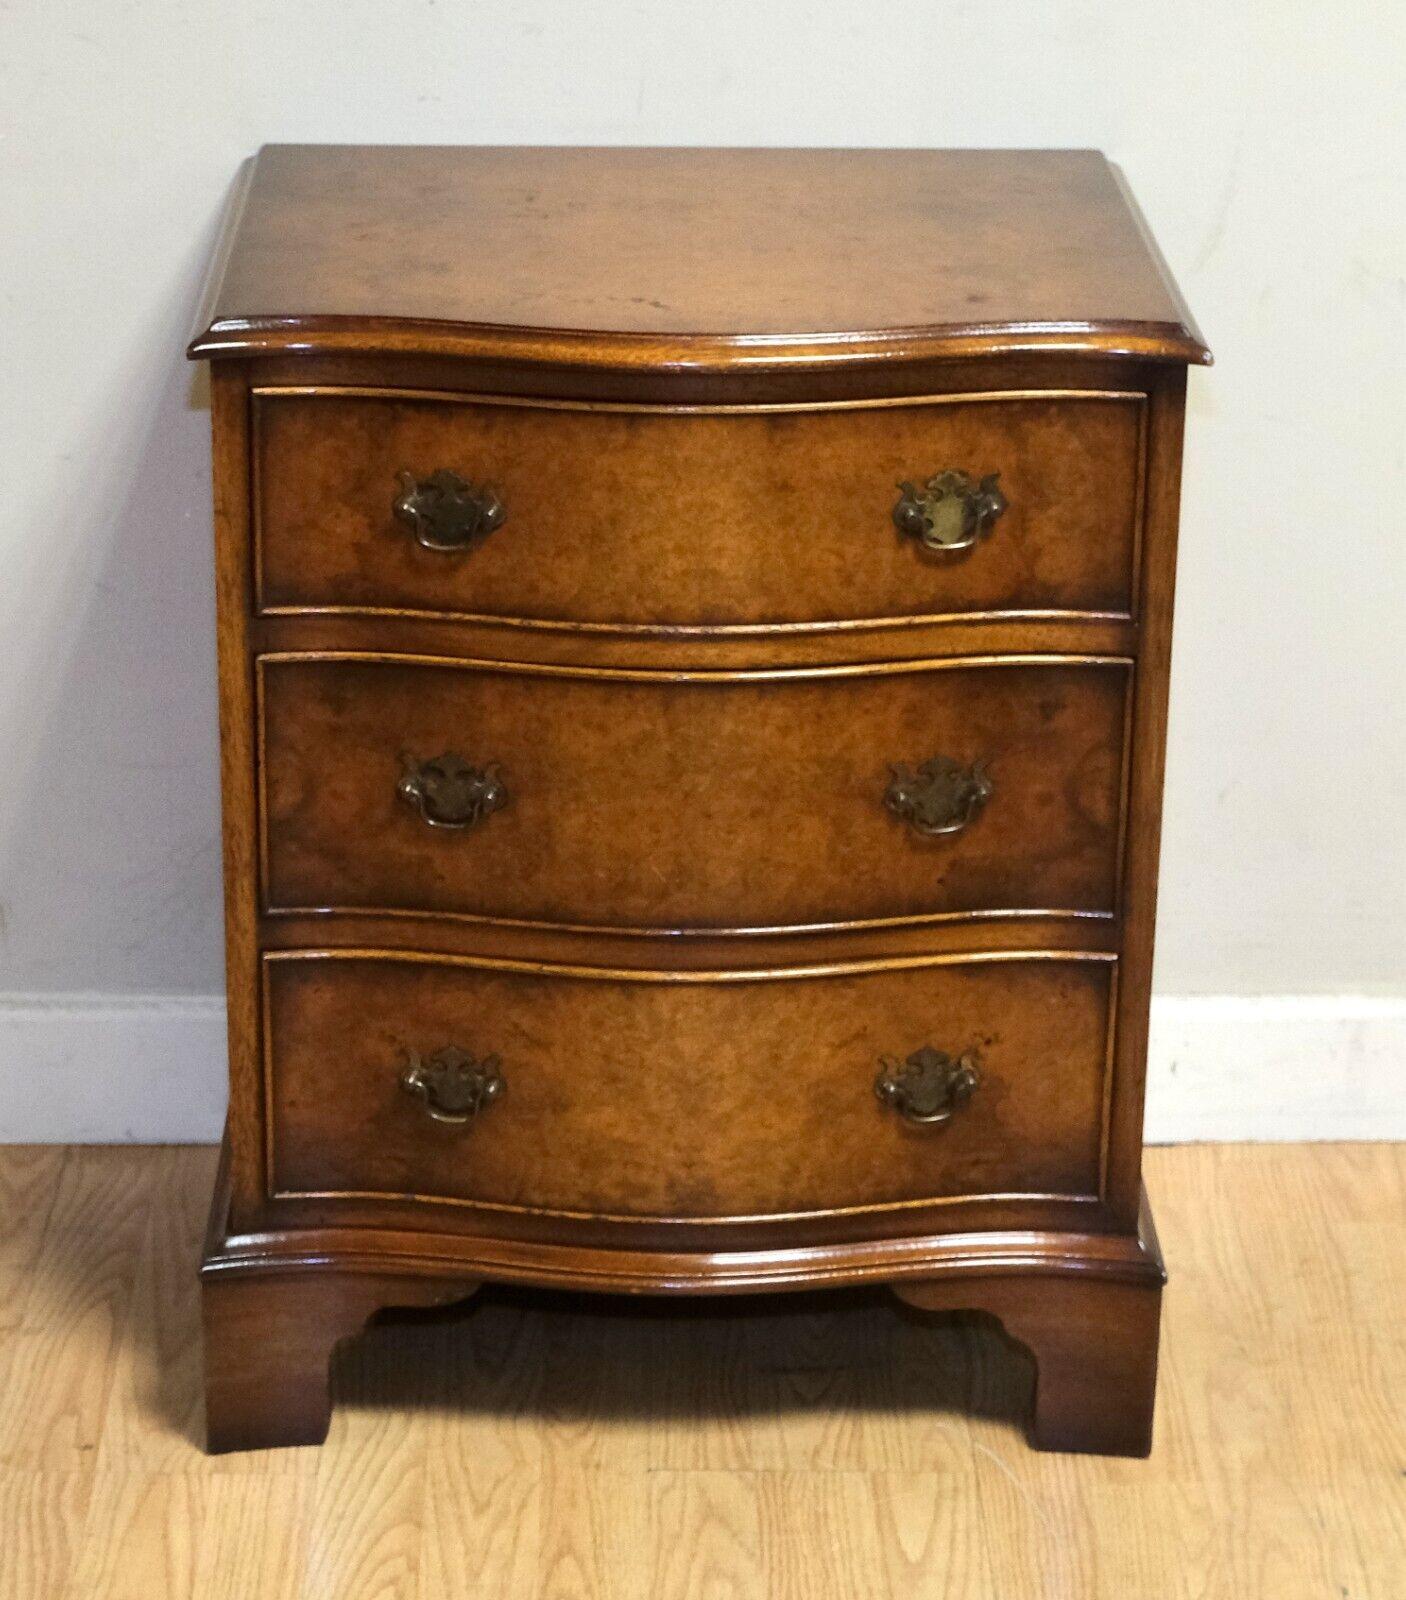 We are delighted to offer for sale this lovely 1960s Bevan Funell Burr Walnut serpentine fronted chest of drawers.

This good looking and well made piece is from the well known, English furniture makers, Bevan Funnell, it shows quality of the